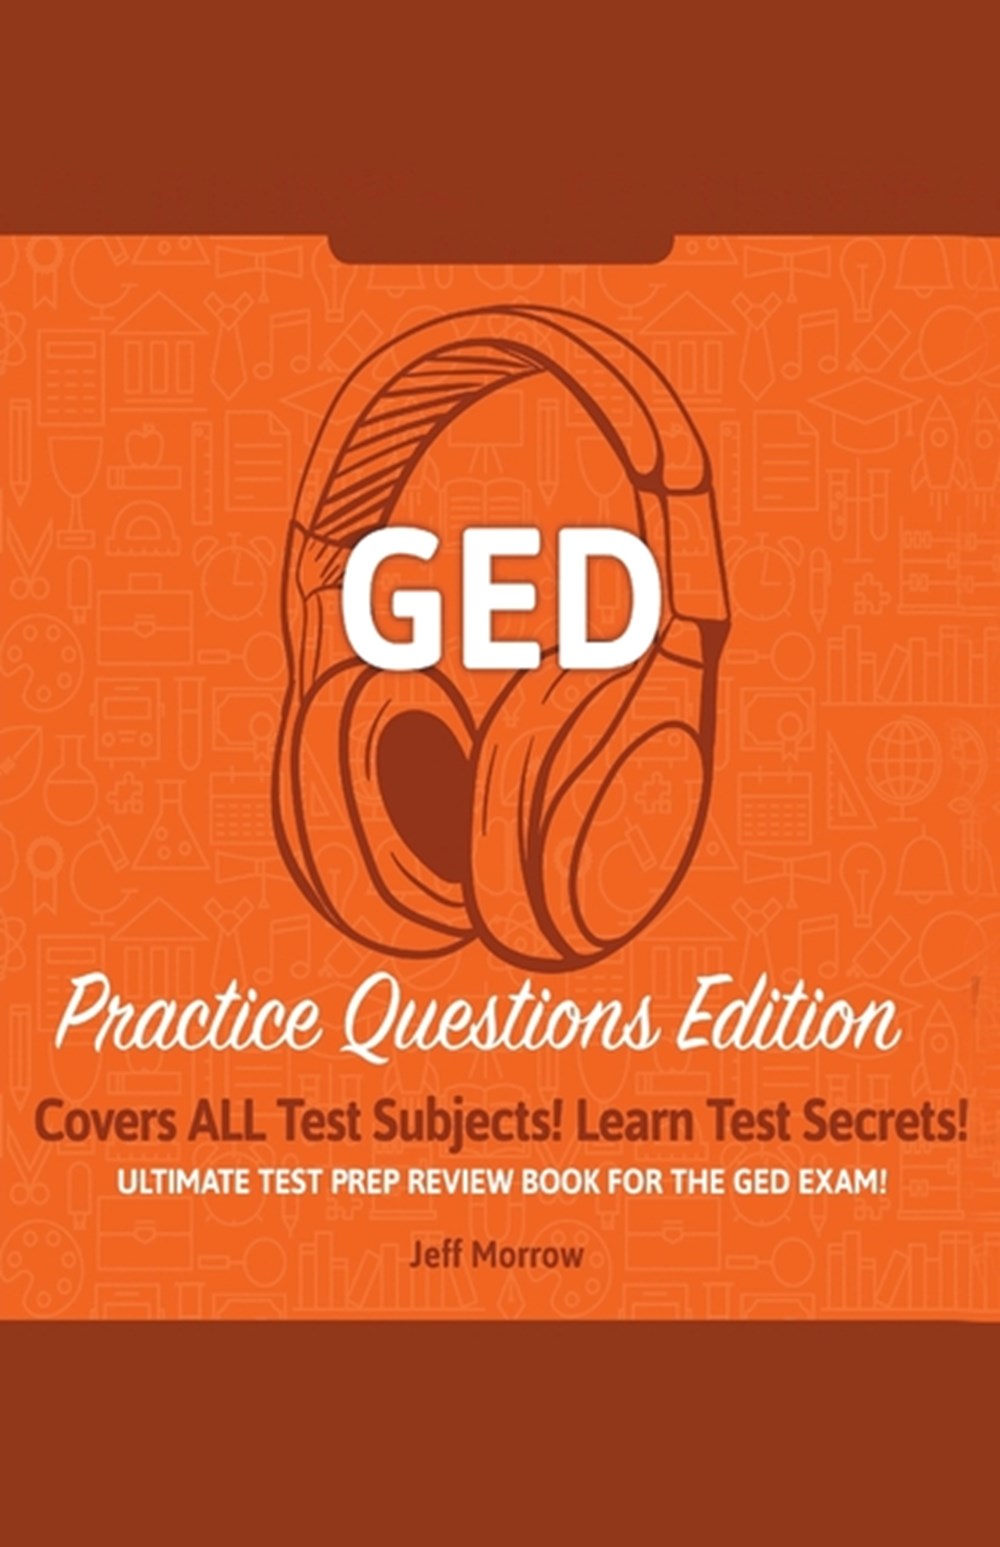 Buy GED Study Guide! Practice Questions Edition! Ultimate Test Prep